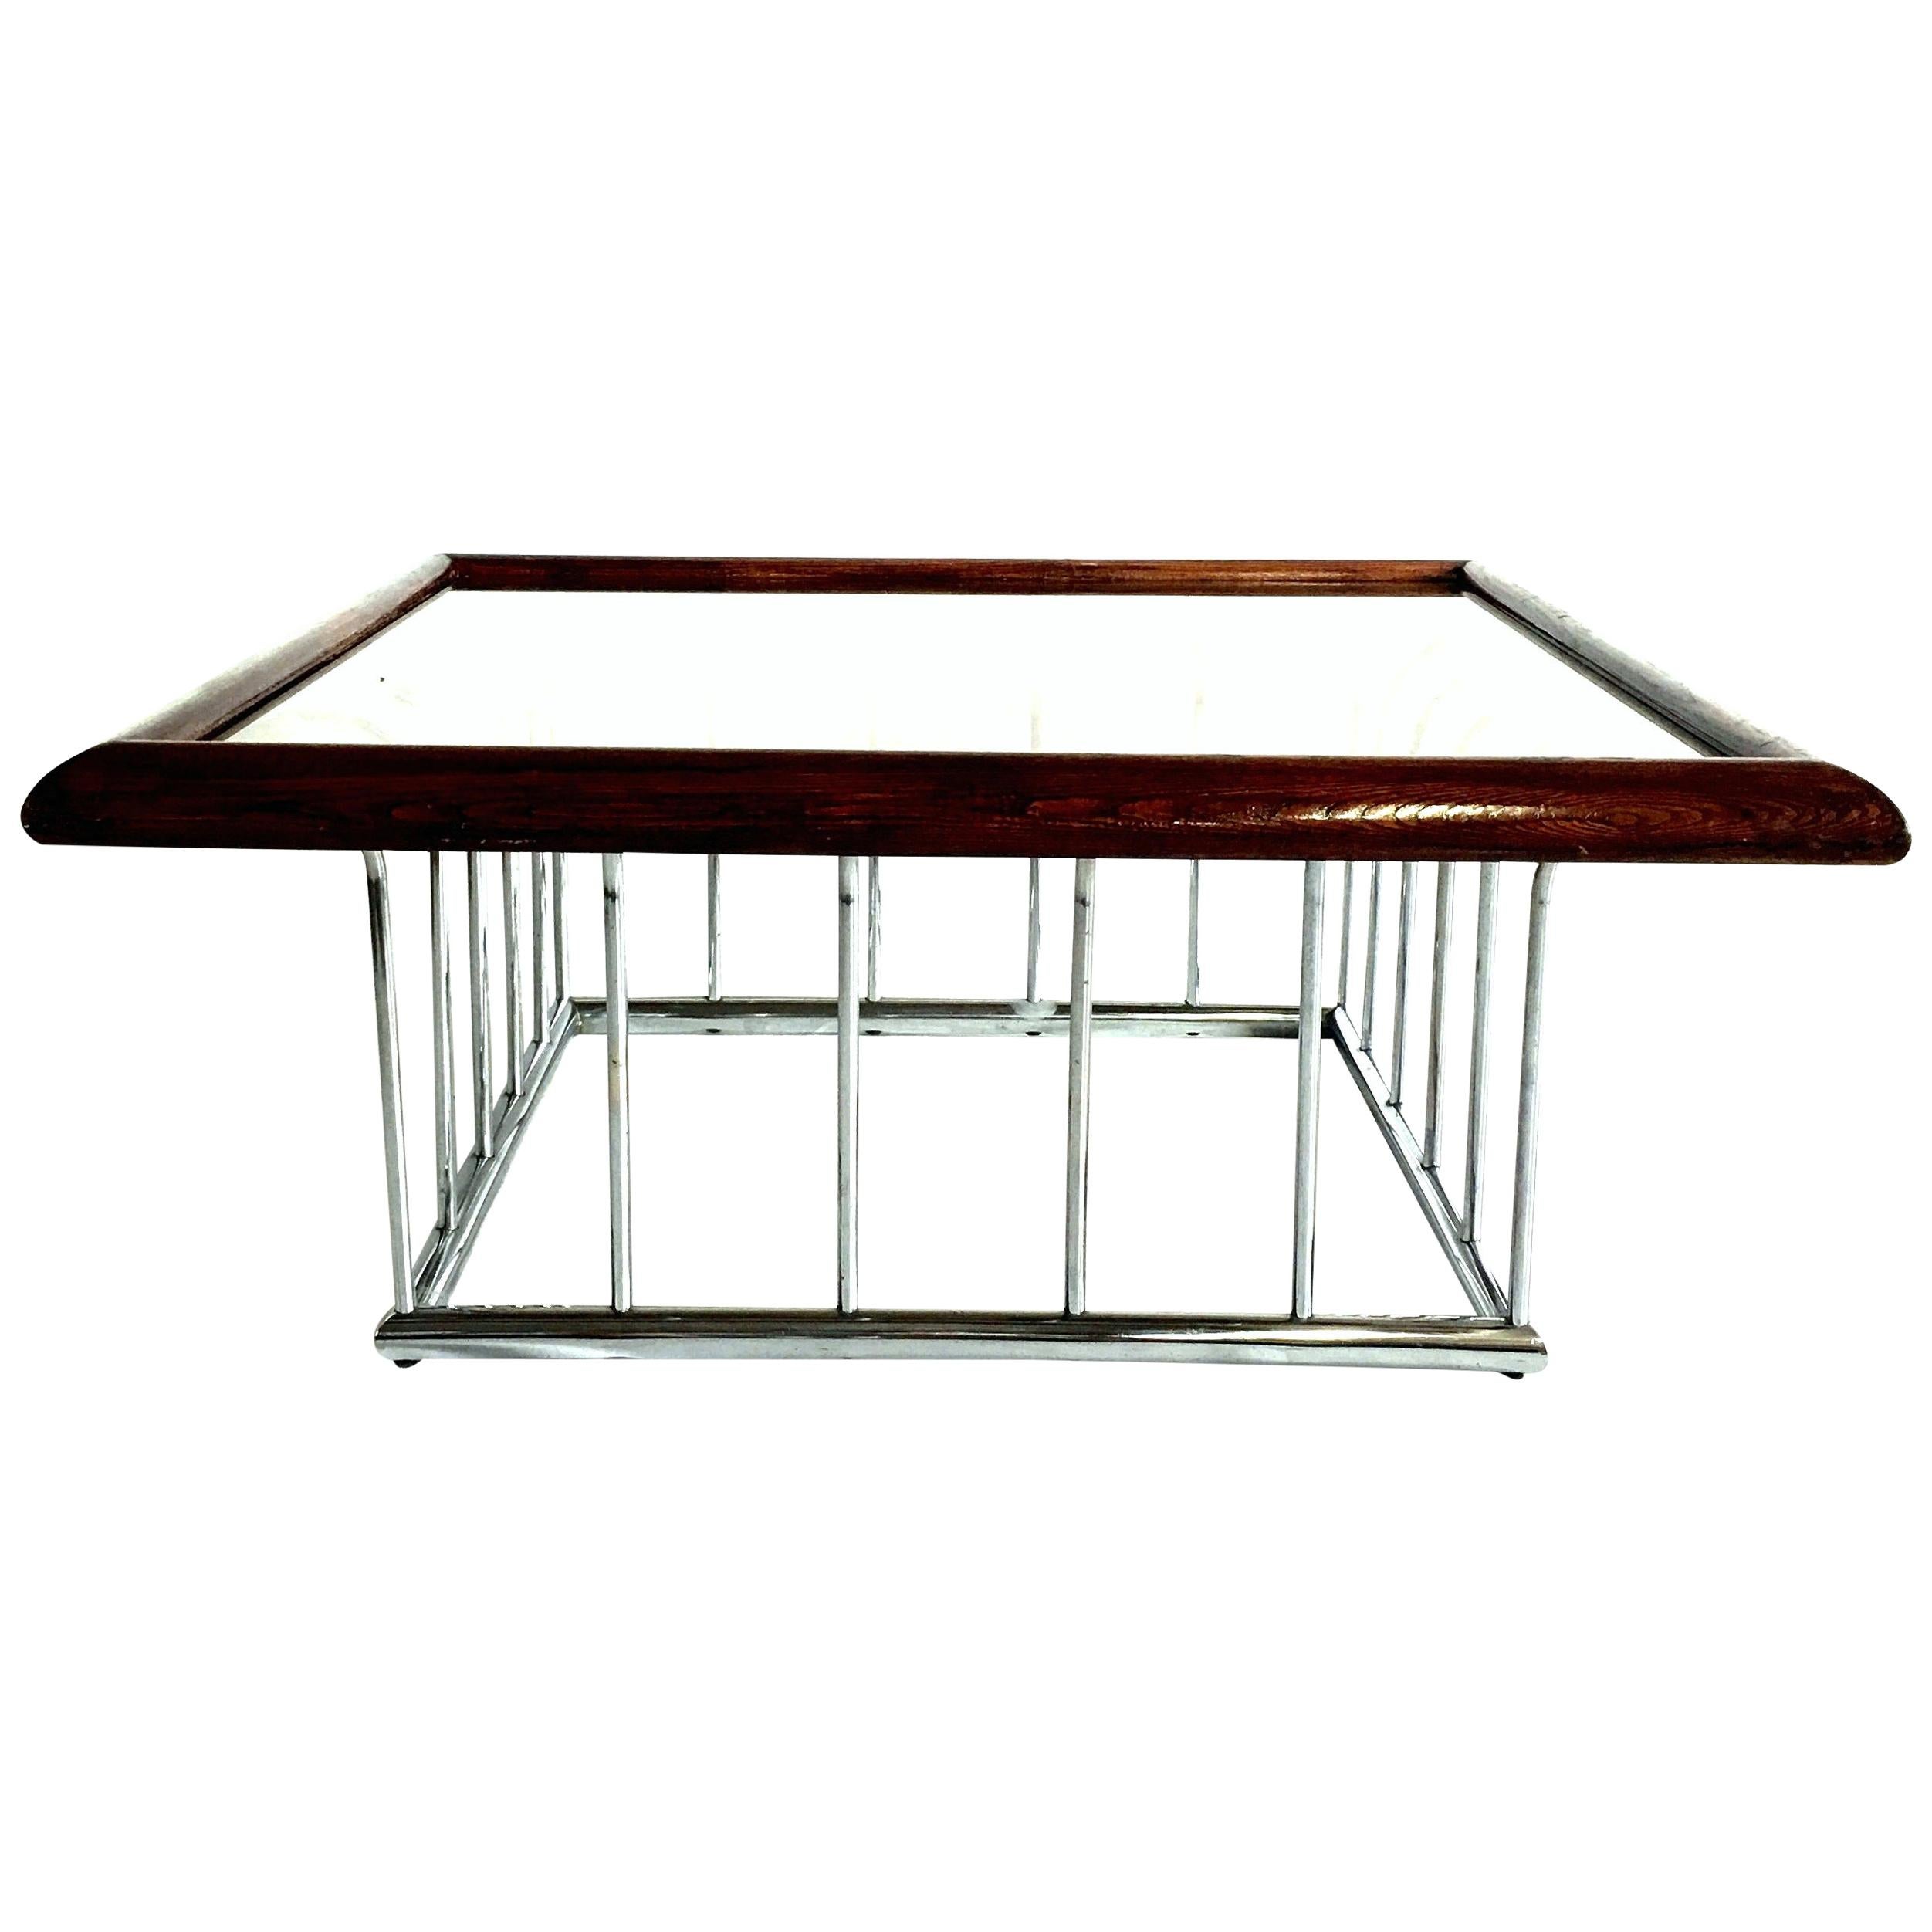 Mid-Century Modern Milo Baughman style bent tubular chrome spoke base square coffee table with wood stained mahogany edge and original smoked glass top. Size approximately 40